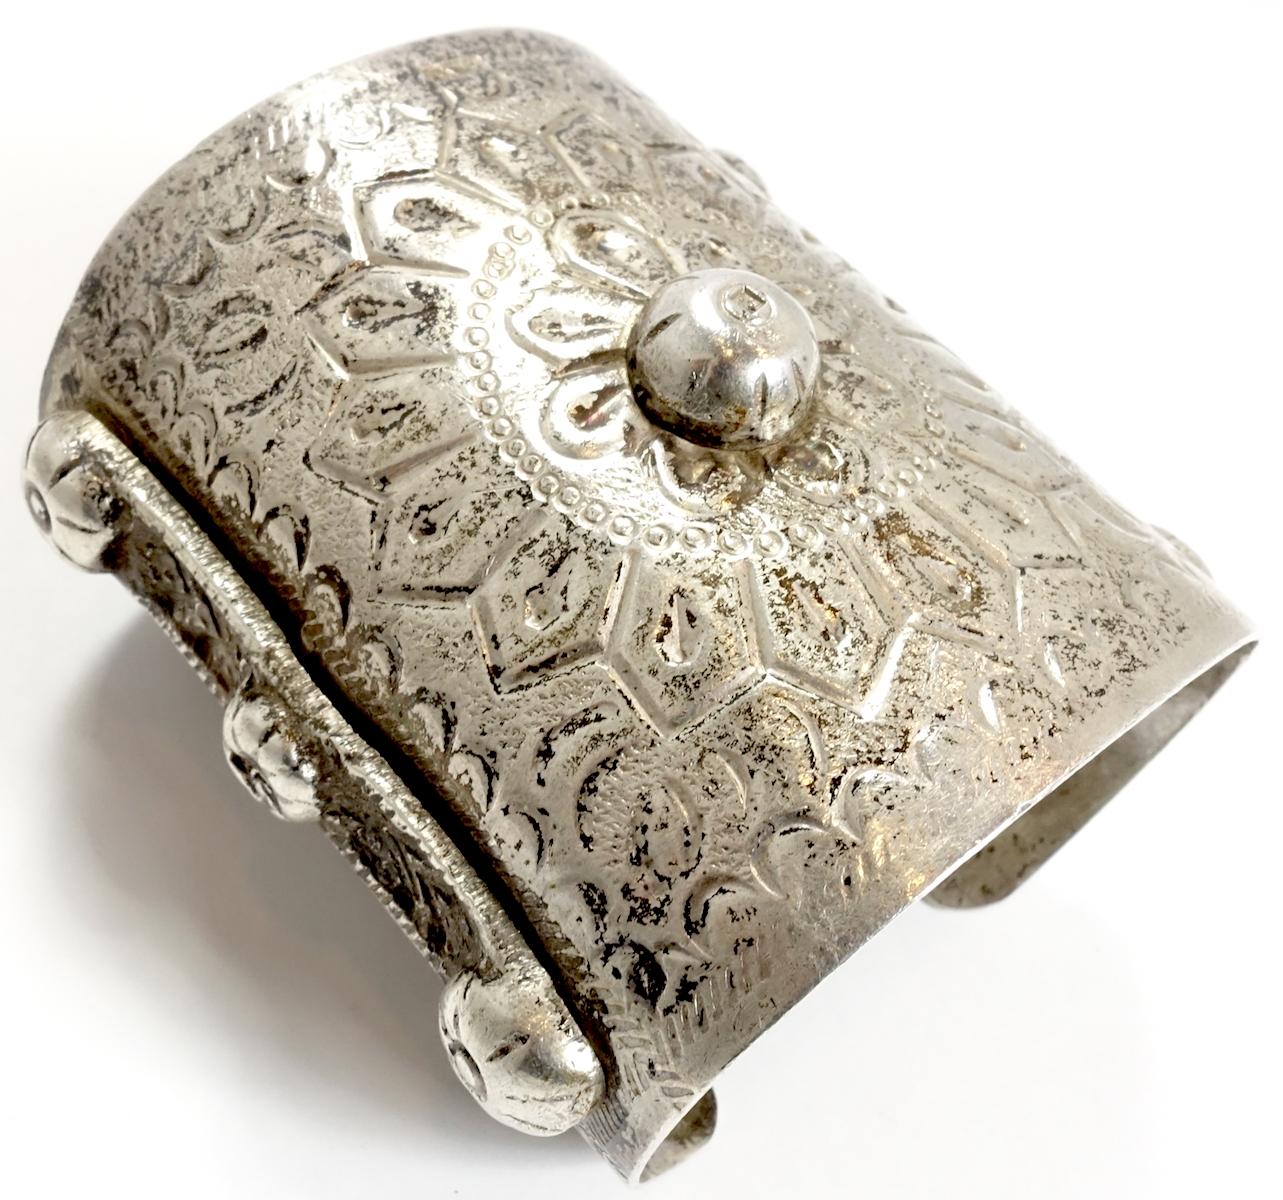 The collector who sold me this piece said she thinks her mom bought it here in the USA.  This wide handmade vintage cuff Sterling Silver bracelet is heavily carved and weighs 5-1/2 oz and is a sight to behold.  This piece measures 7” around the